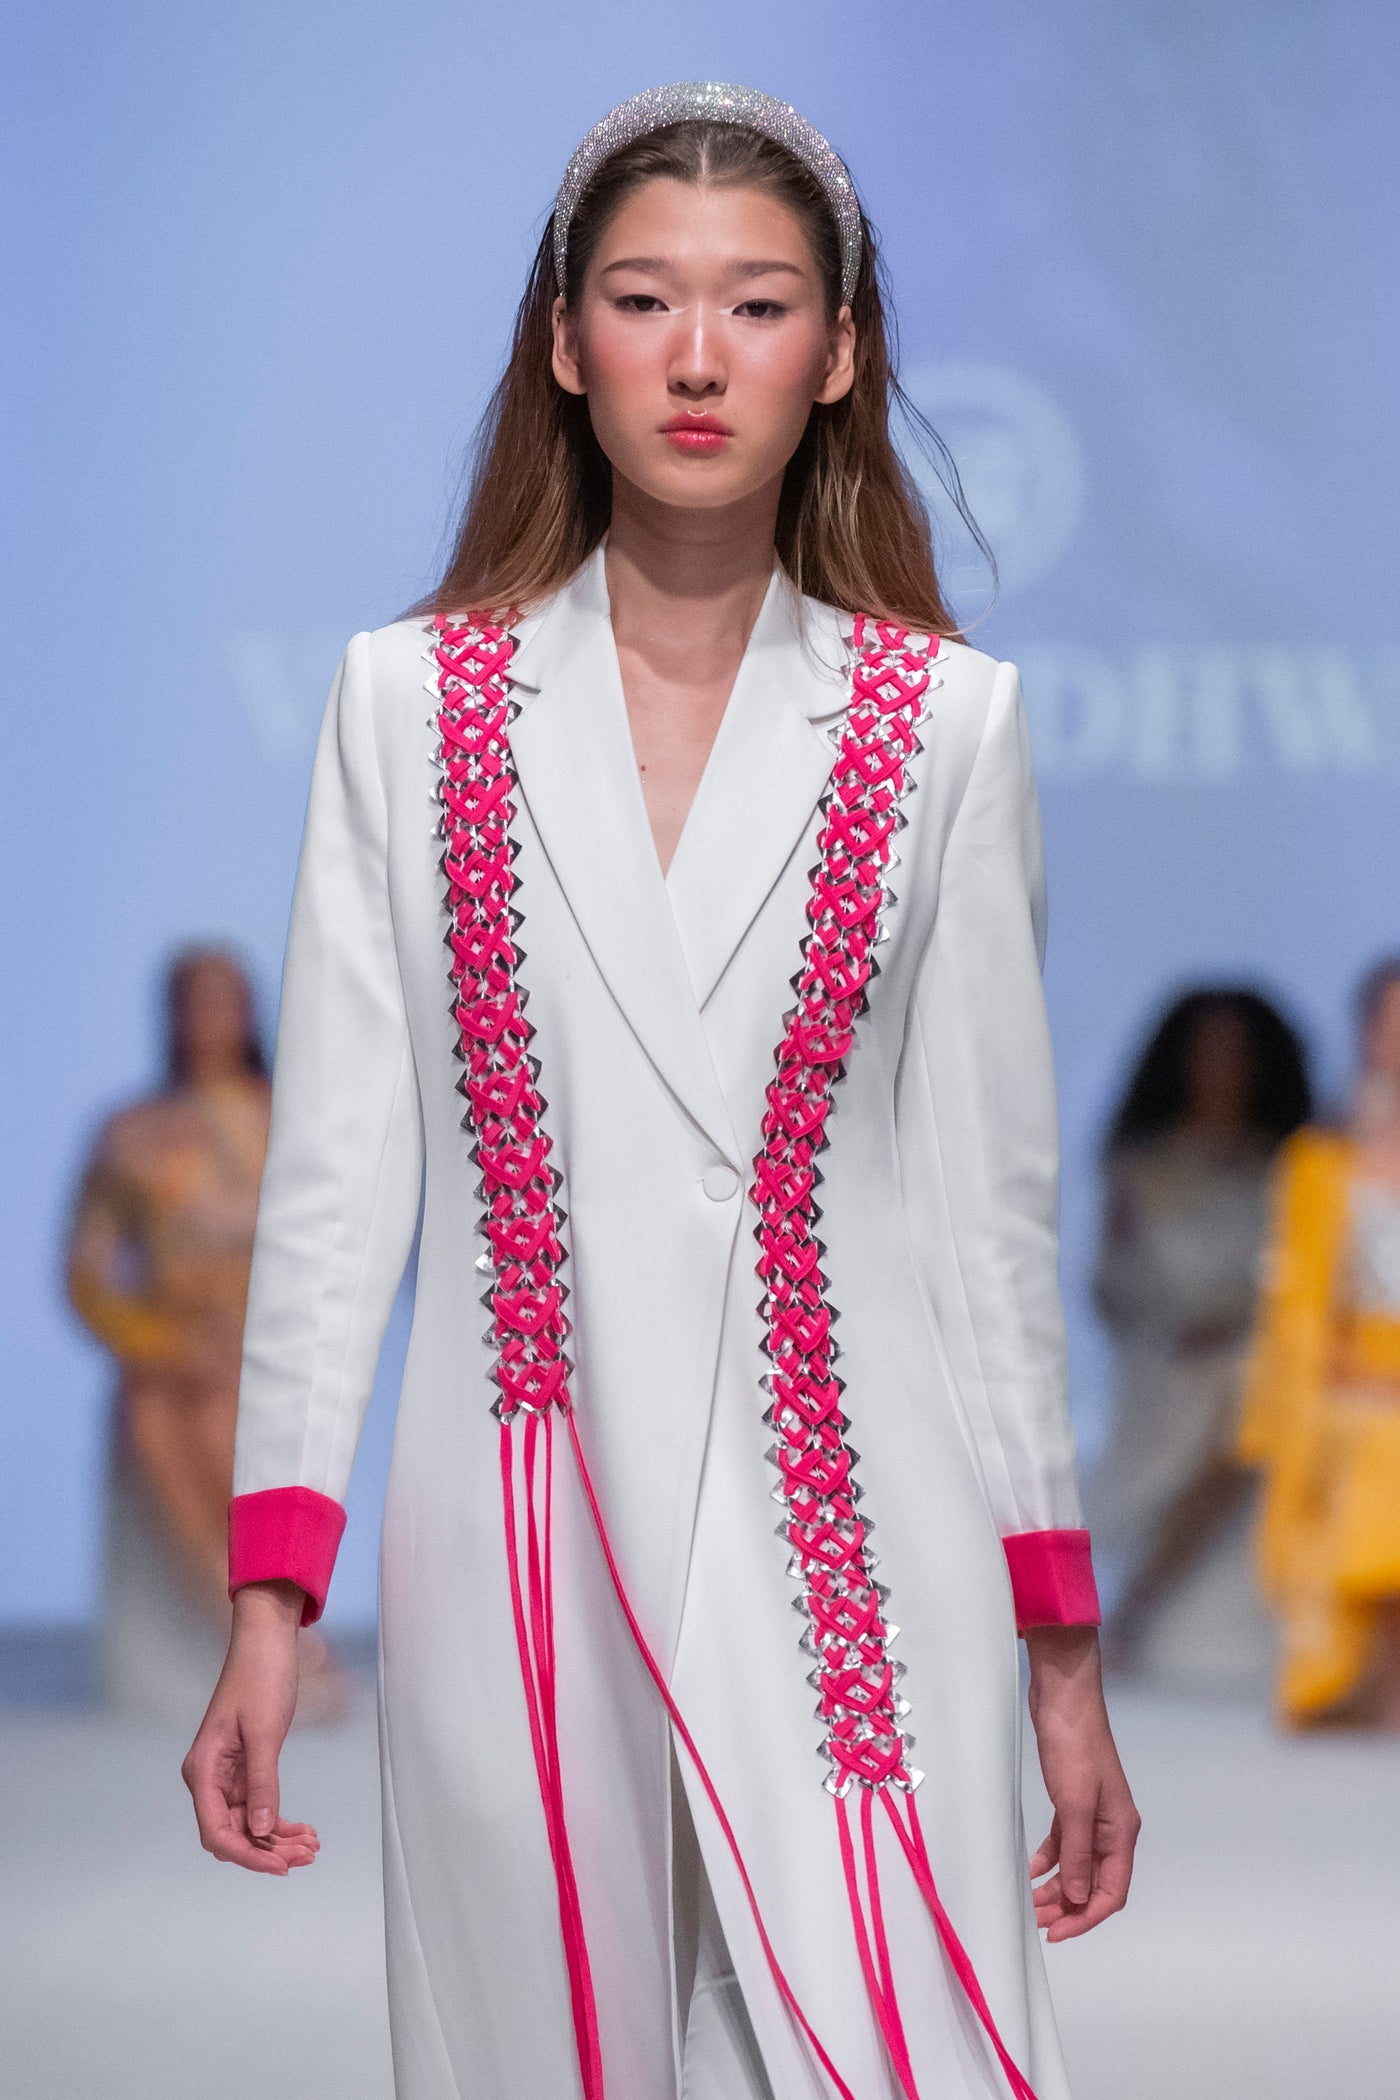 CILO Blazer Suit With Pink Woven Fringe